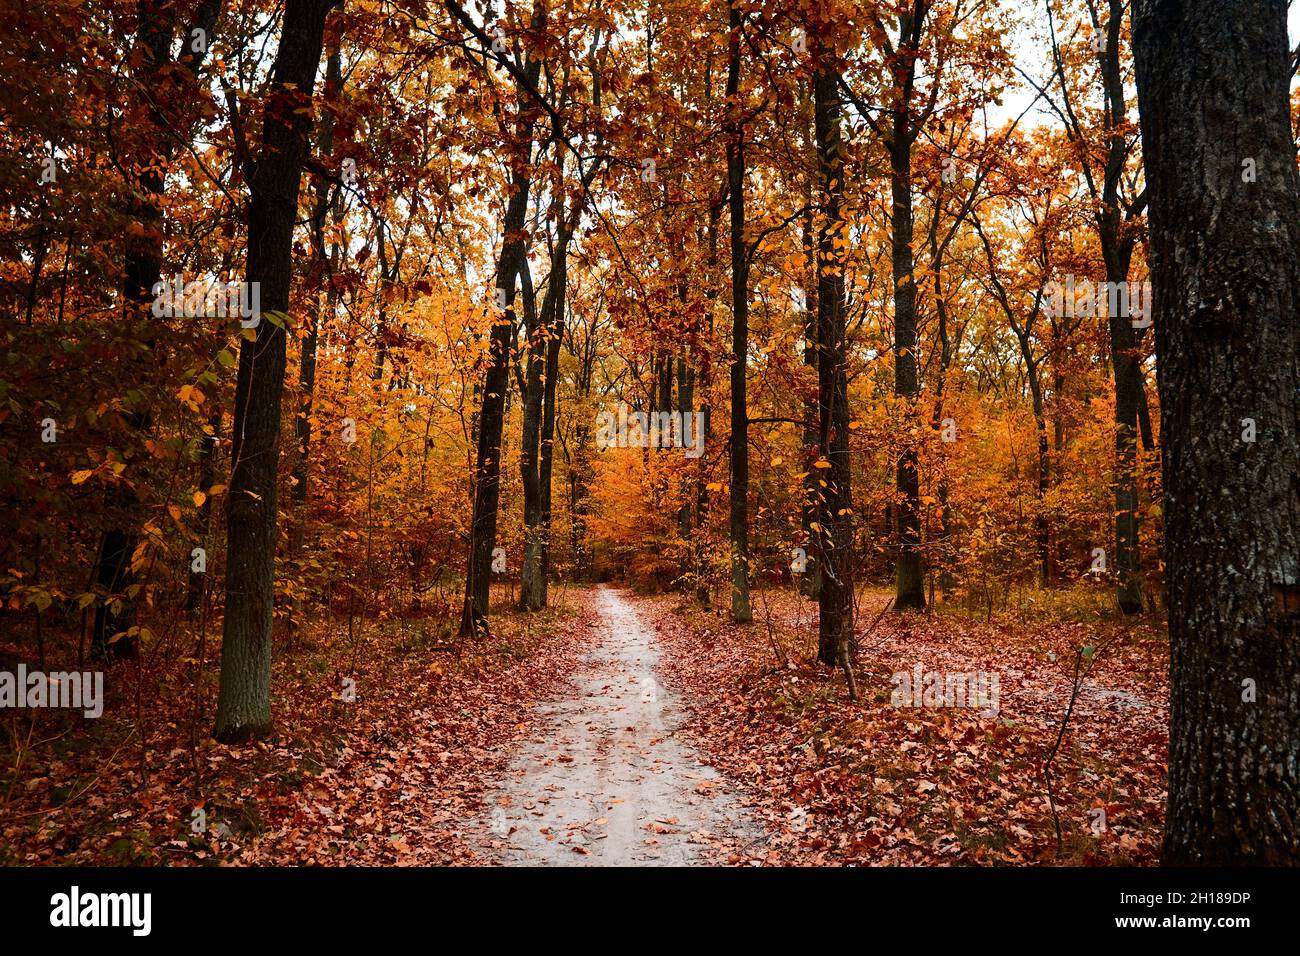 Road among tall hight tree with yellow leaf. Autumn forest with footpath and fallen leaves. Mysterious deciduous woods at evening. Tree-lined pathway Stock Photo